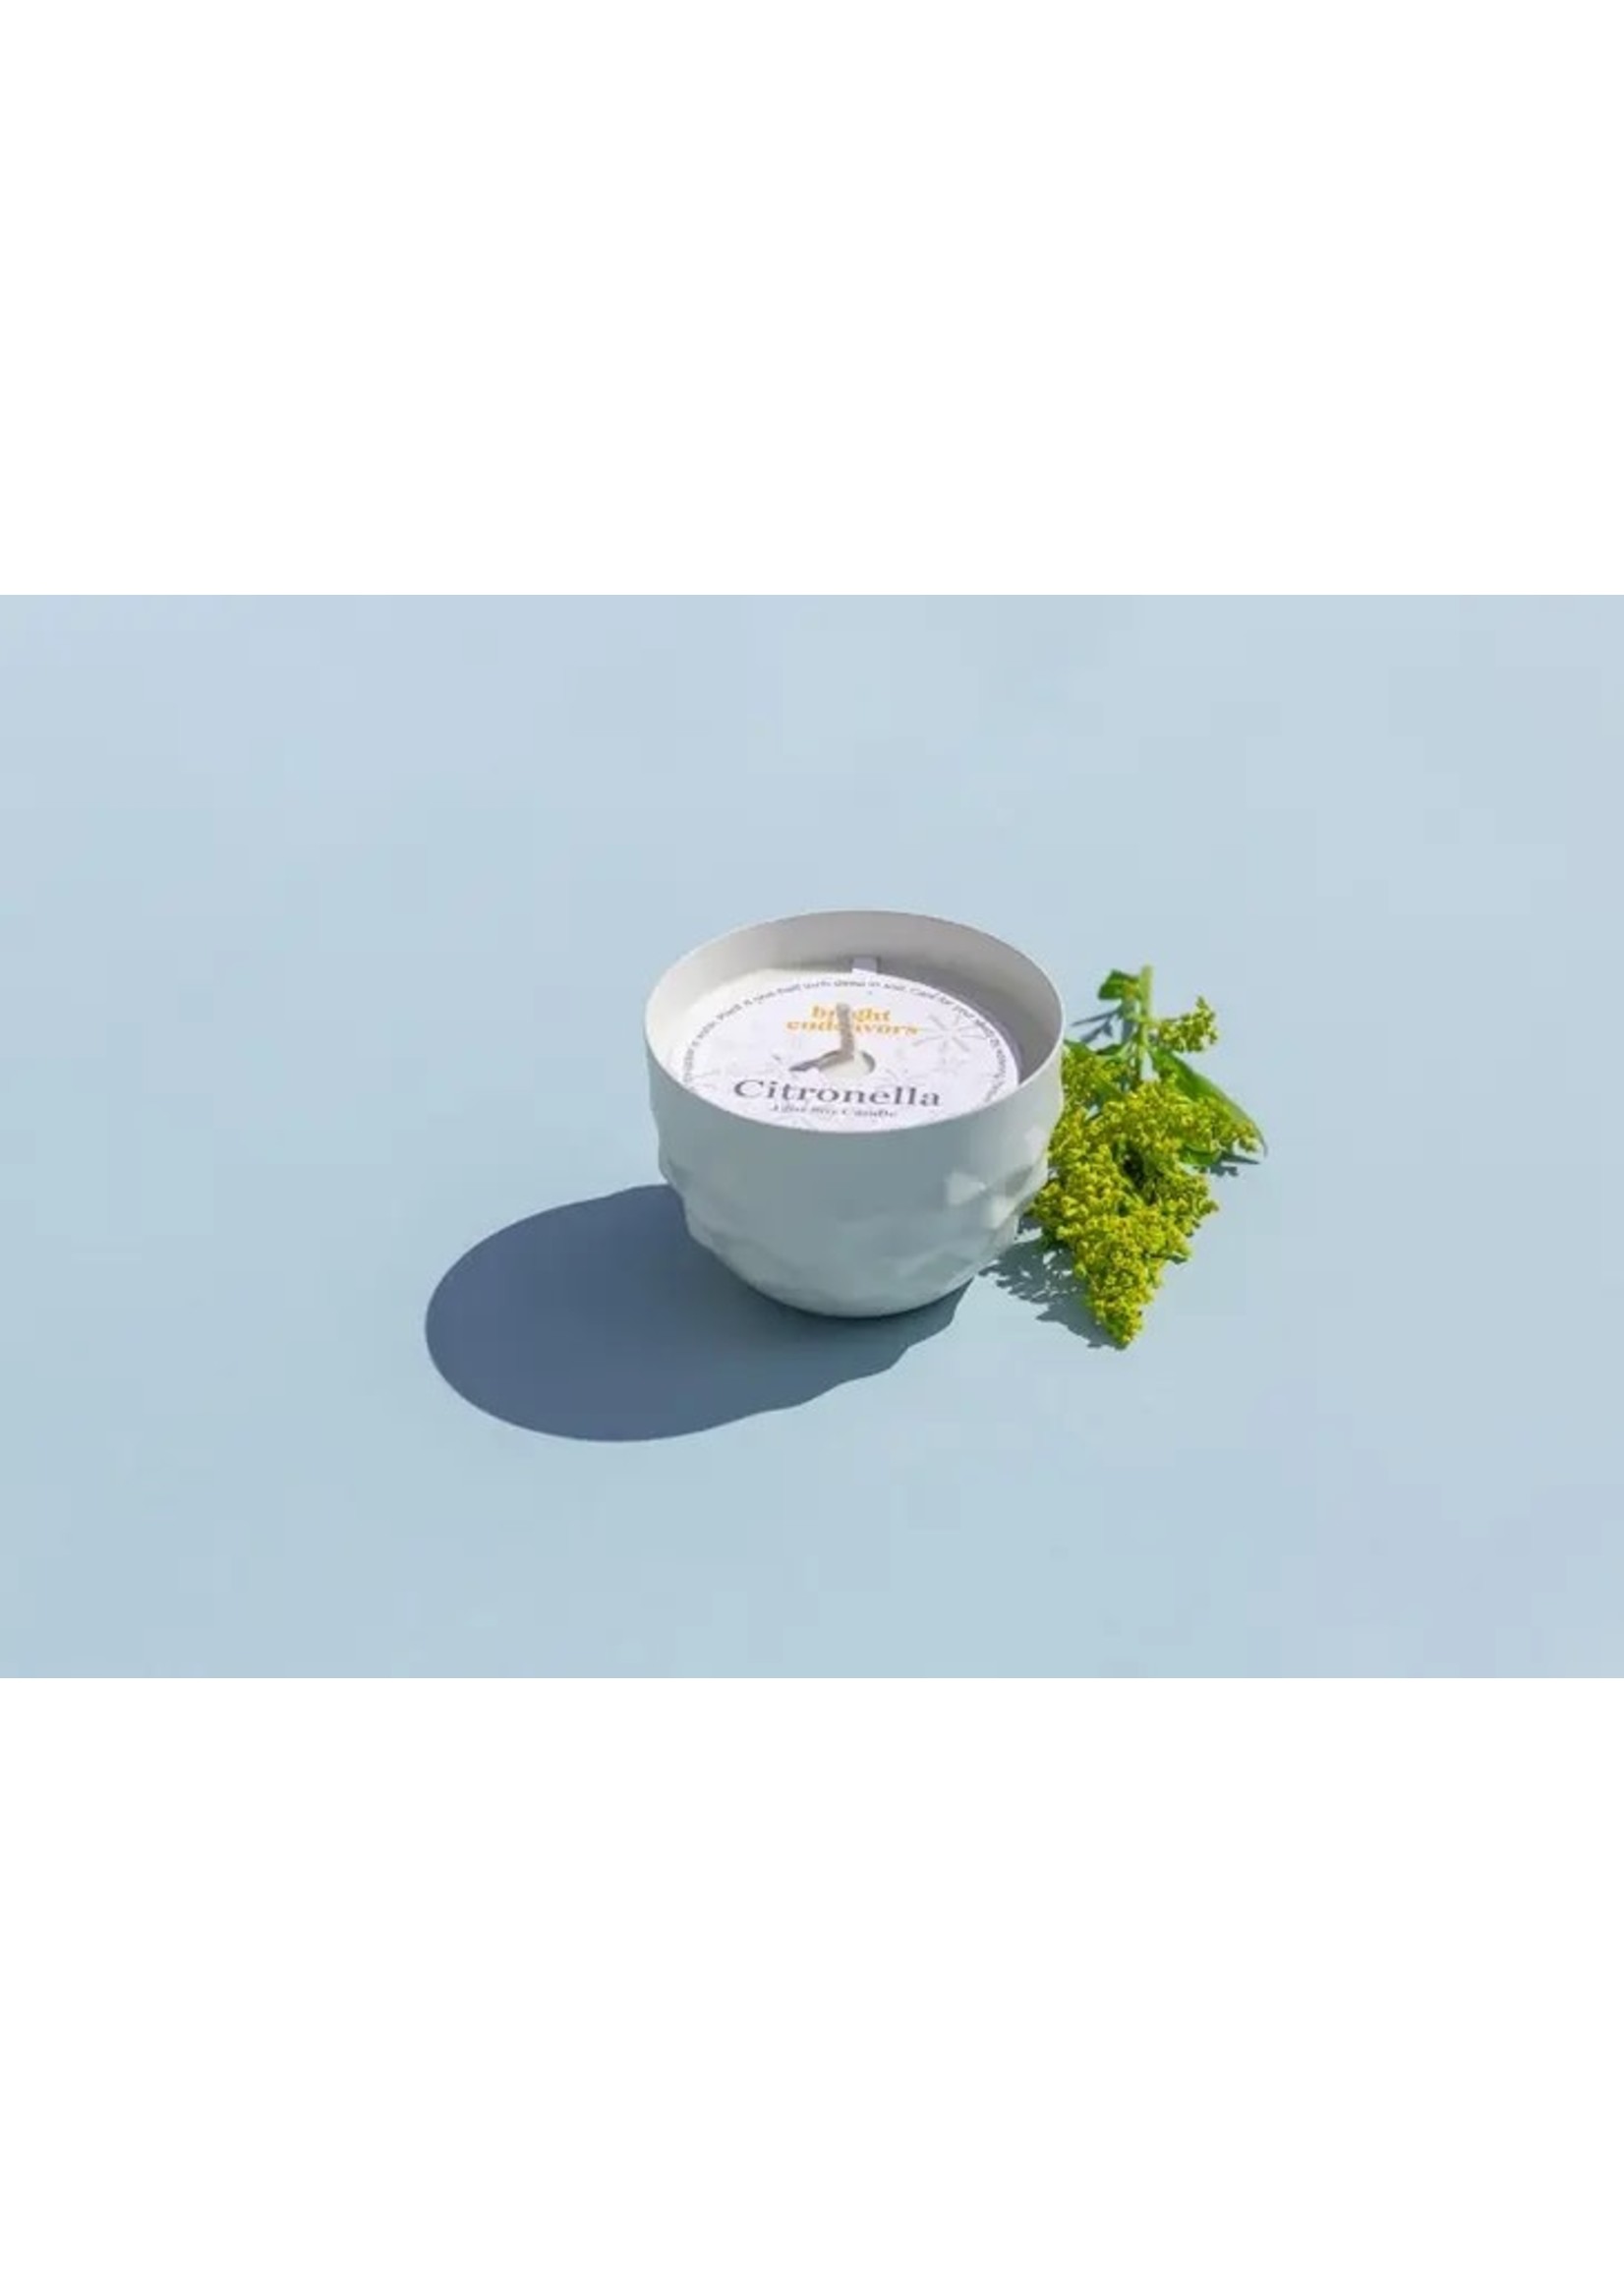 Candle- Citronella Soy Candle  White 12oz